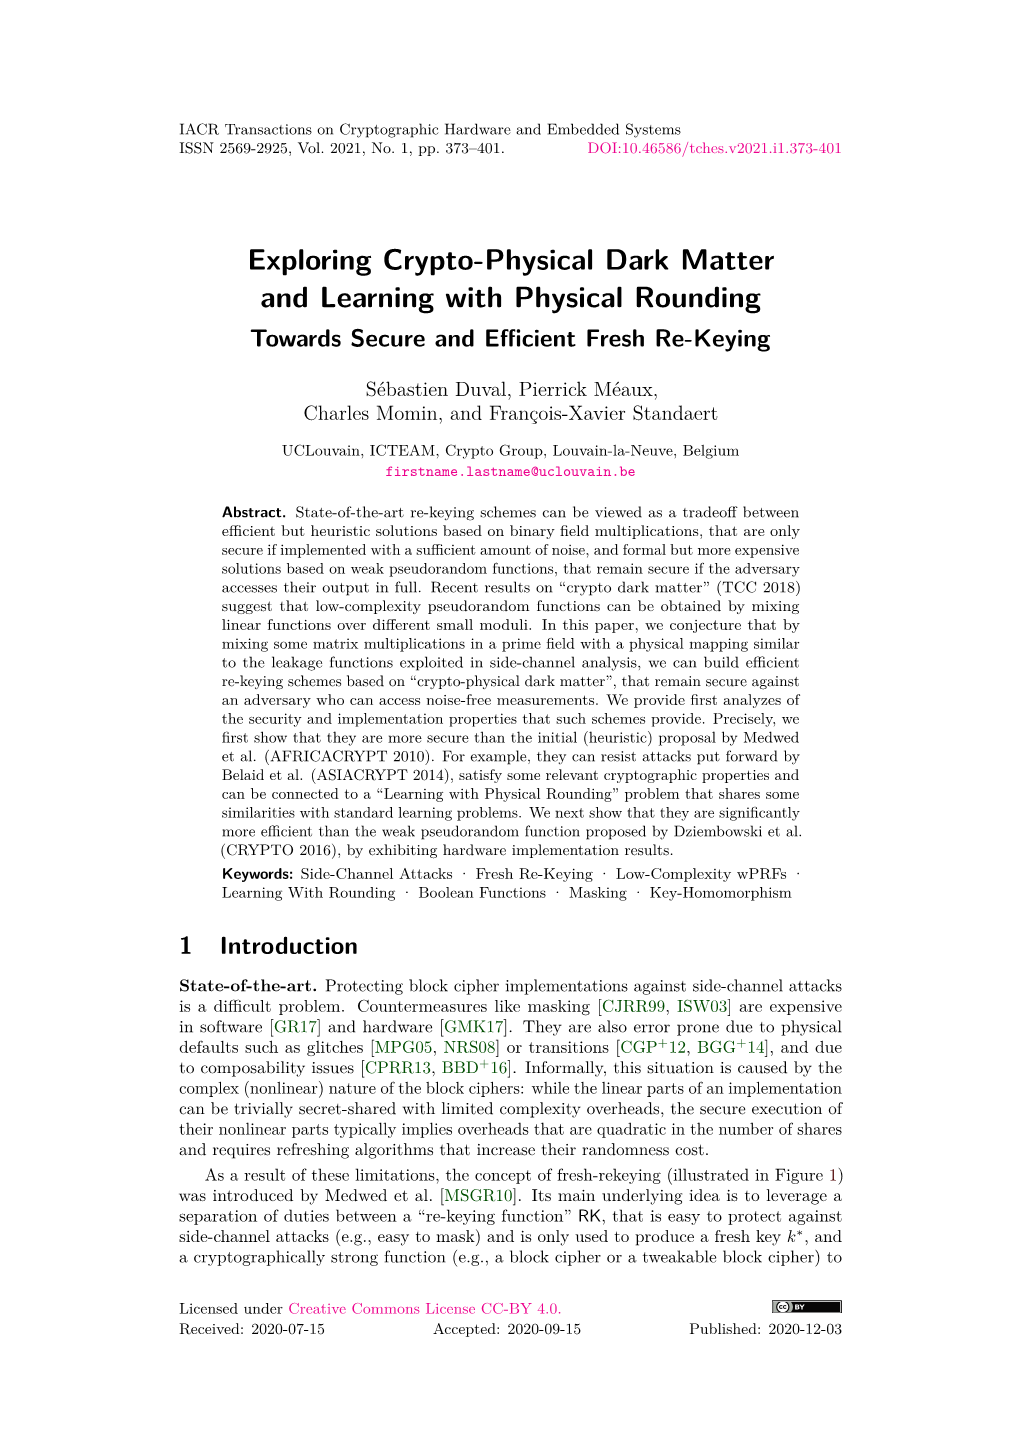 Exploring Crypto-Physical Dark Matter and Learning with Physical Rounding Towards Secure and Eﬃcient Fresh Re-Keying